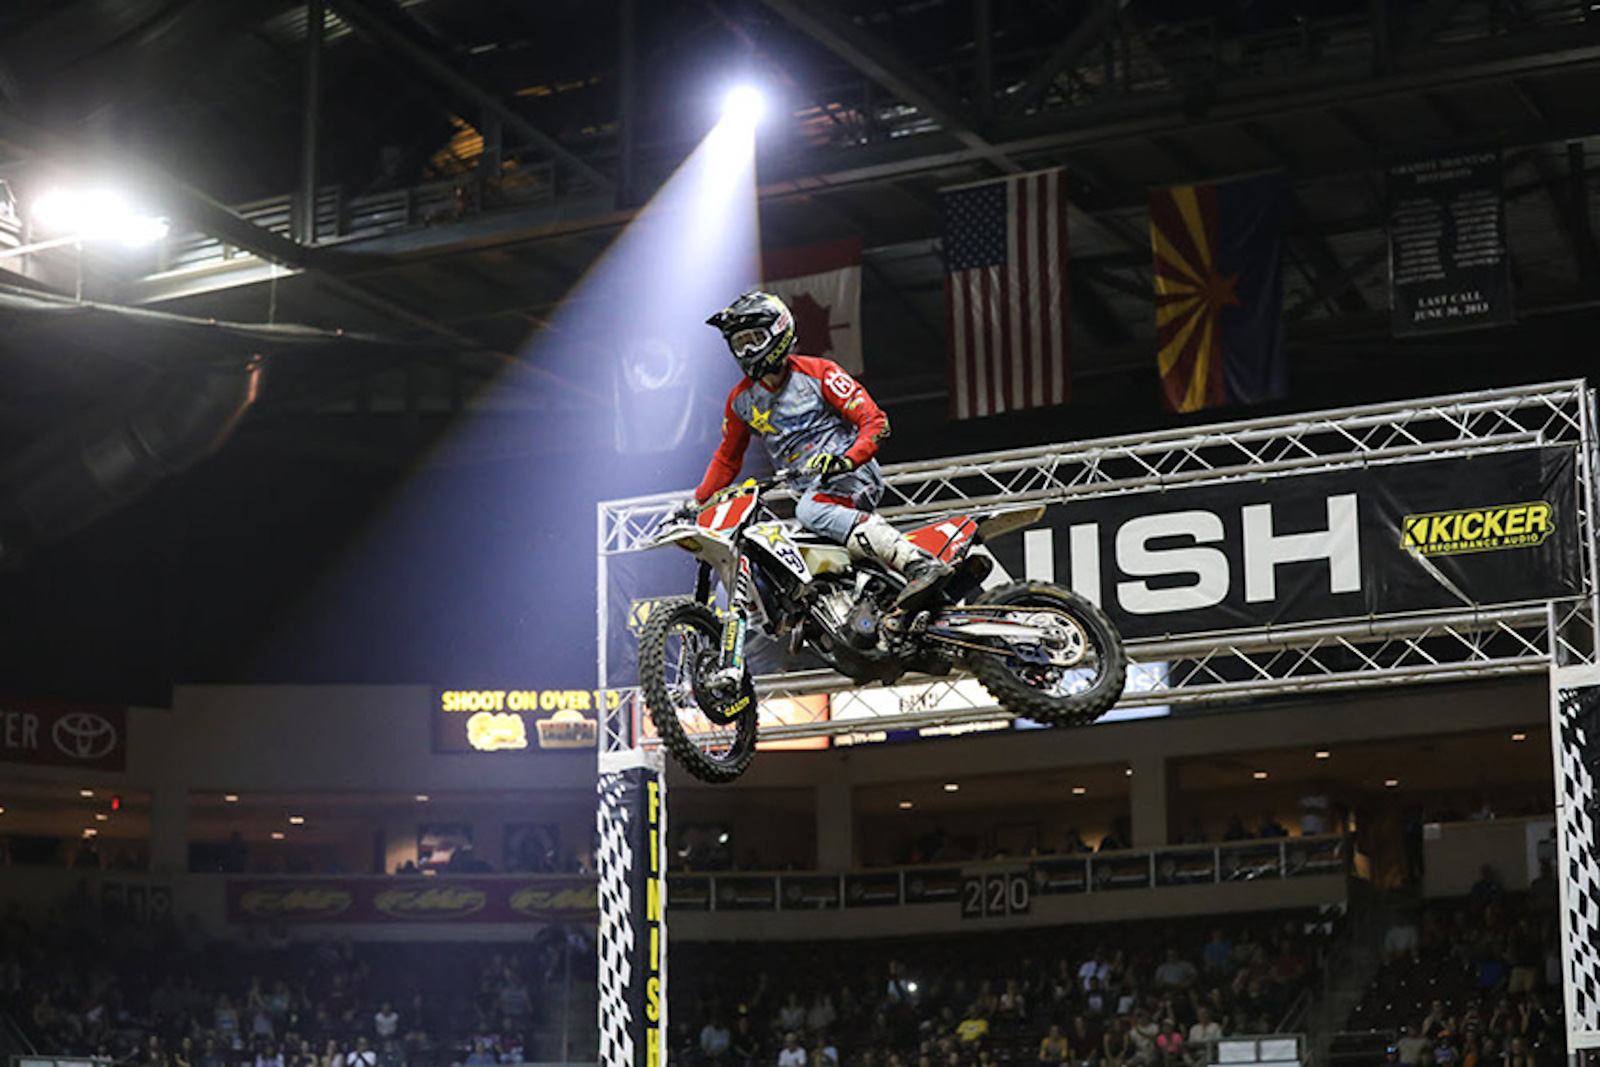 2019 EnduroCross championship back in action this weekend in Denver